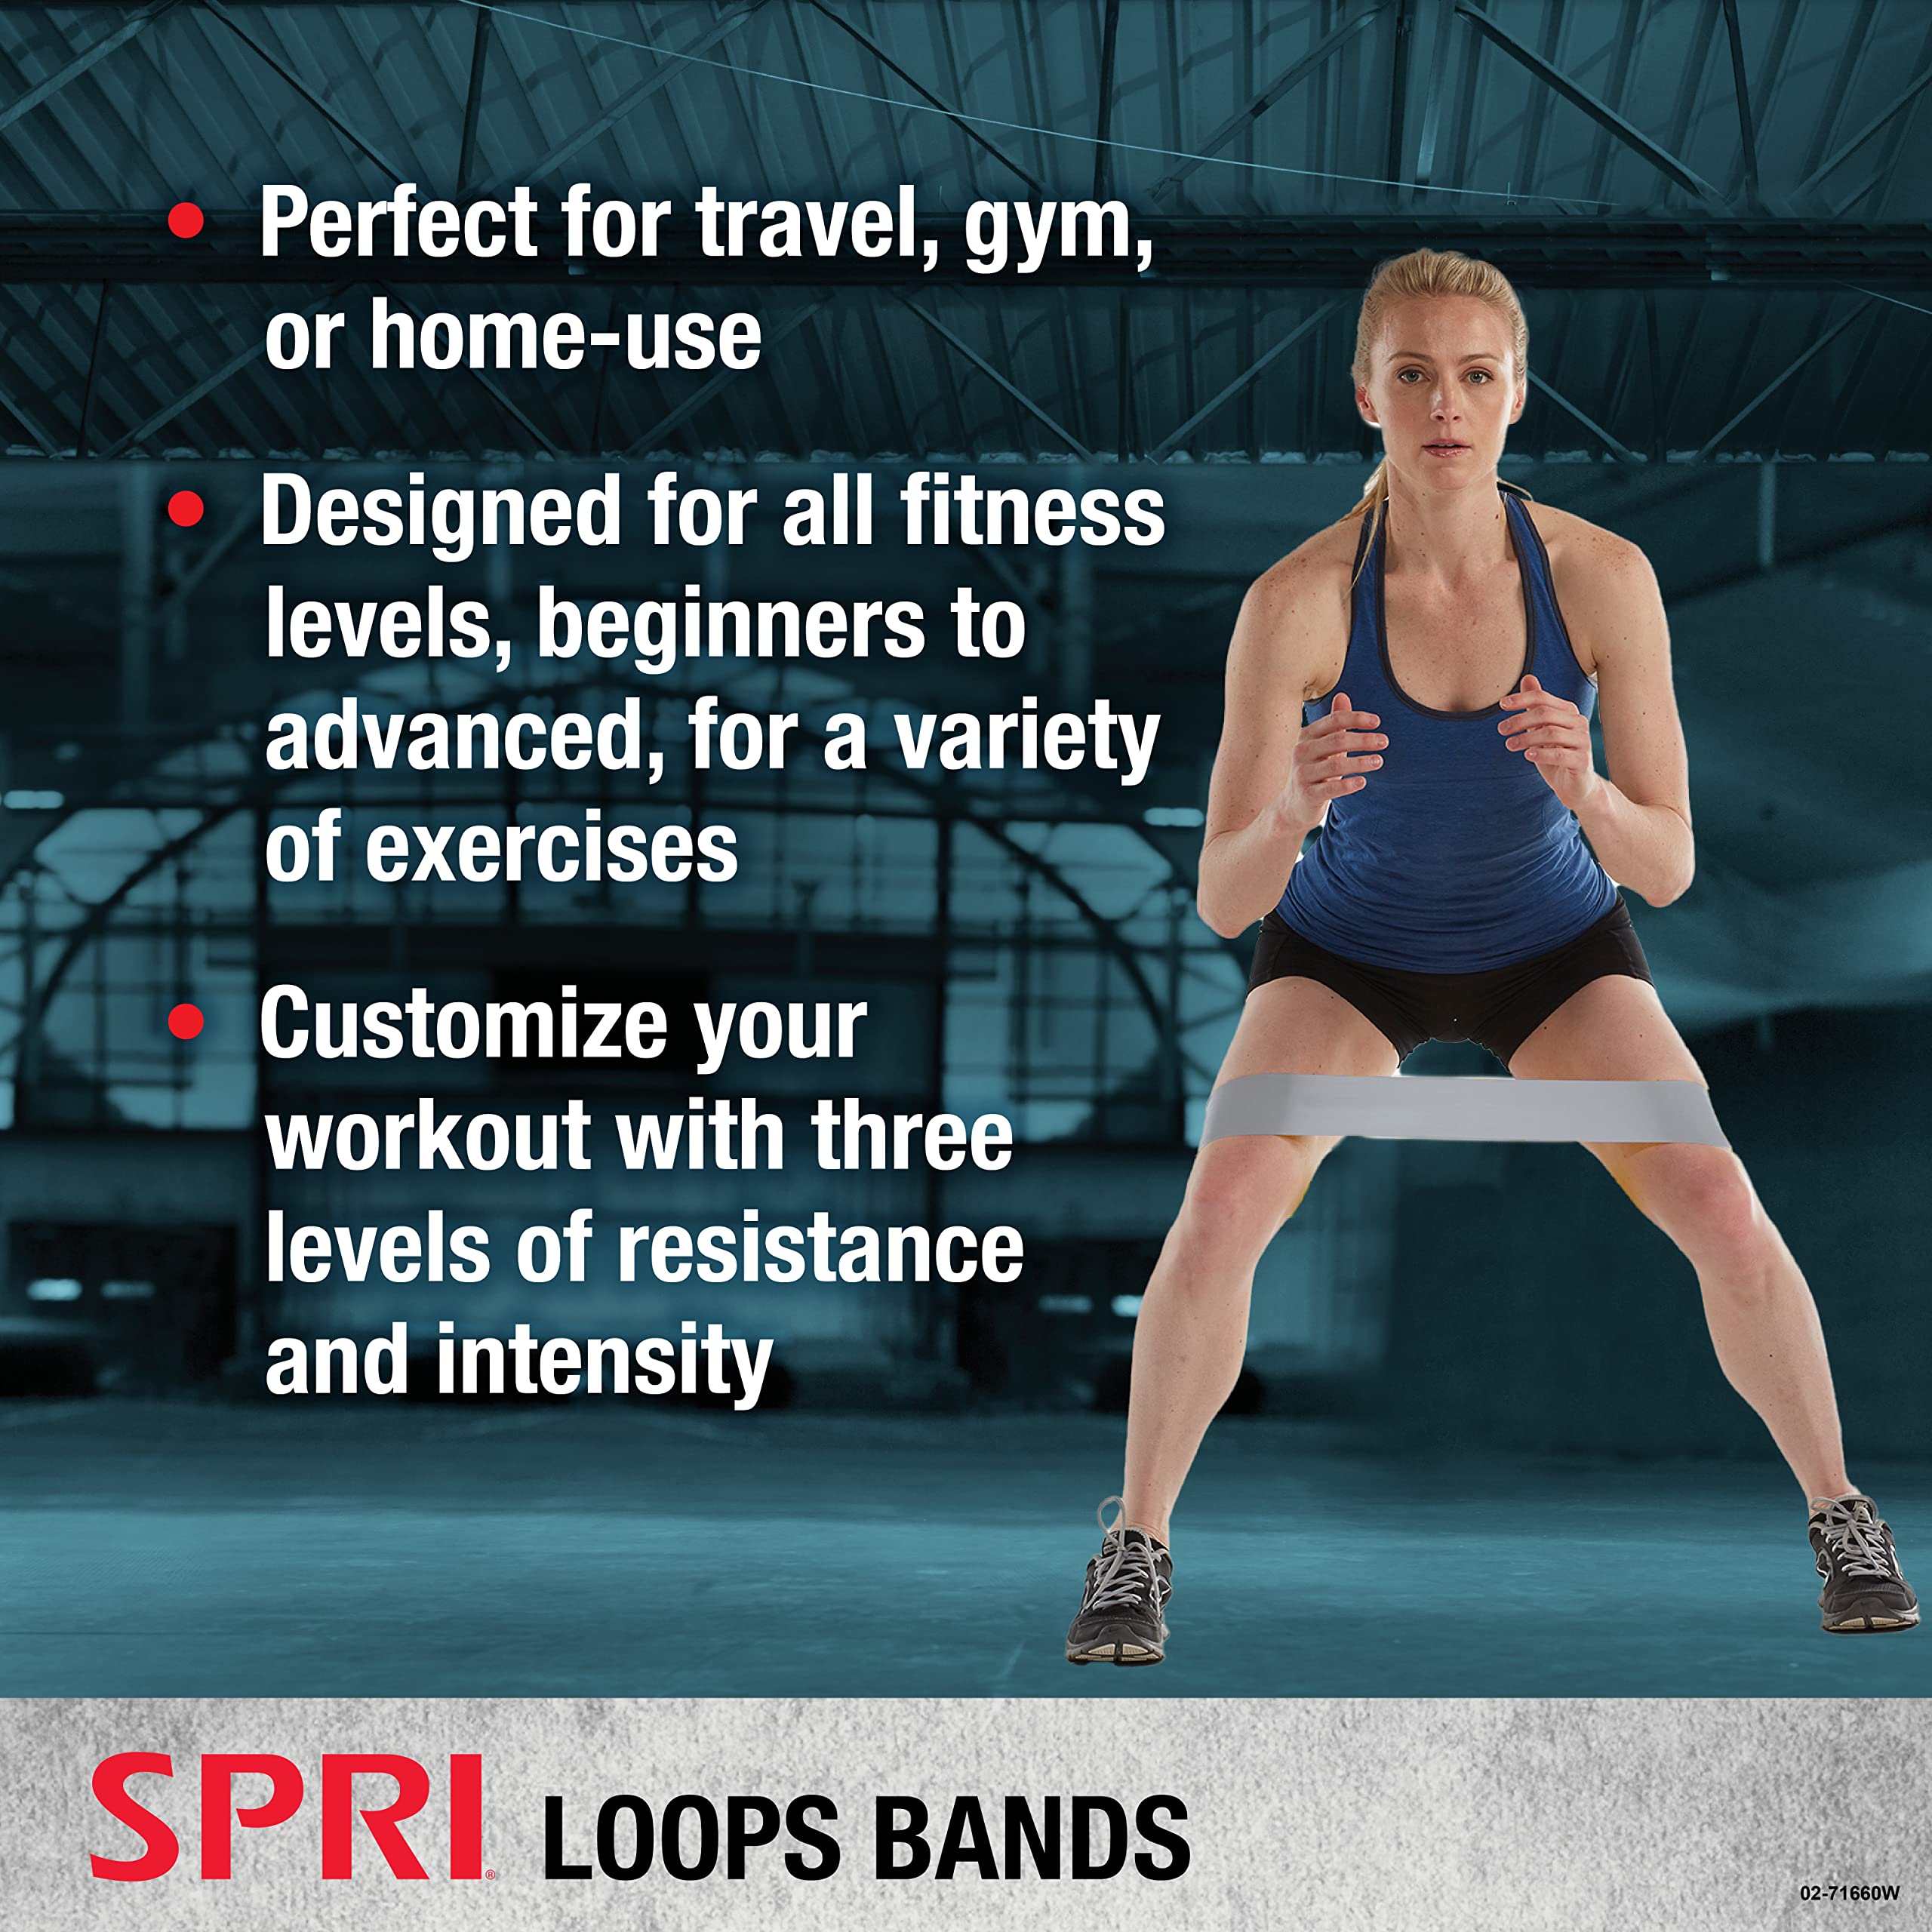 SPRI Standard Loop Bands 3-Pack - Resistance Band Kit Set, 3 Levels of Resistance - Exercise Bands for Strength Training, Flexibility, & Body Workout - Versatile Fitness Tool - Light, Medium, Heavy